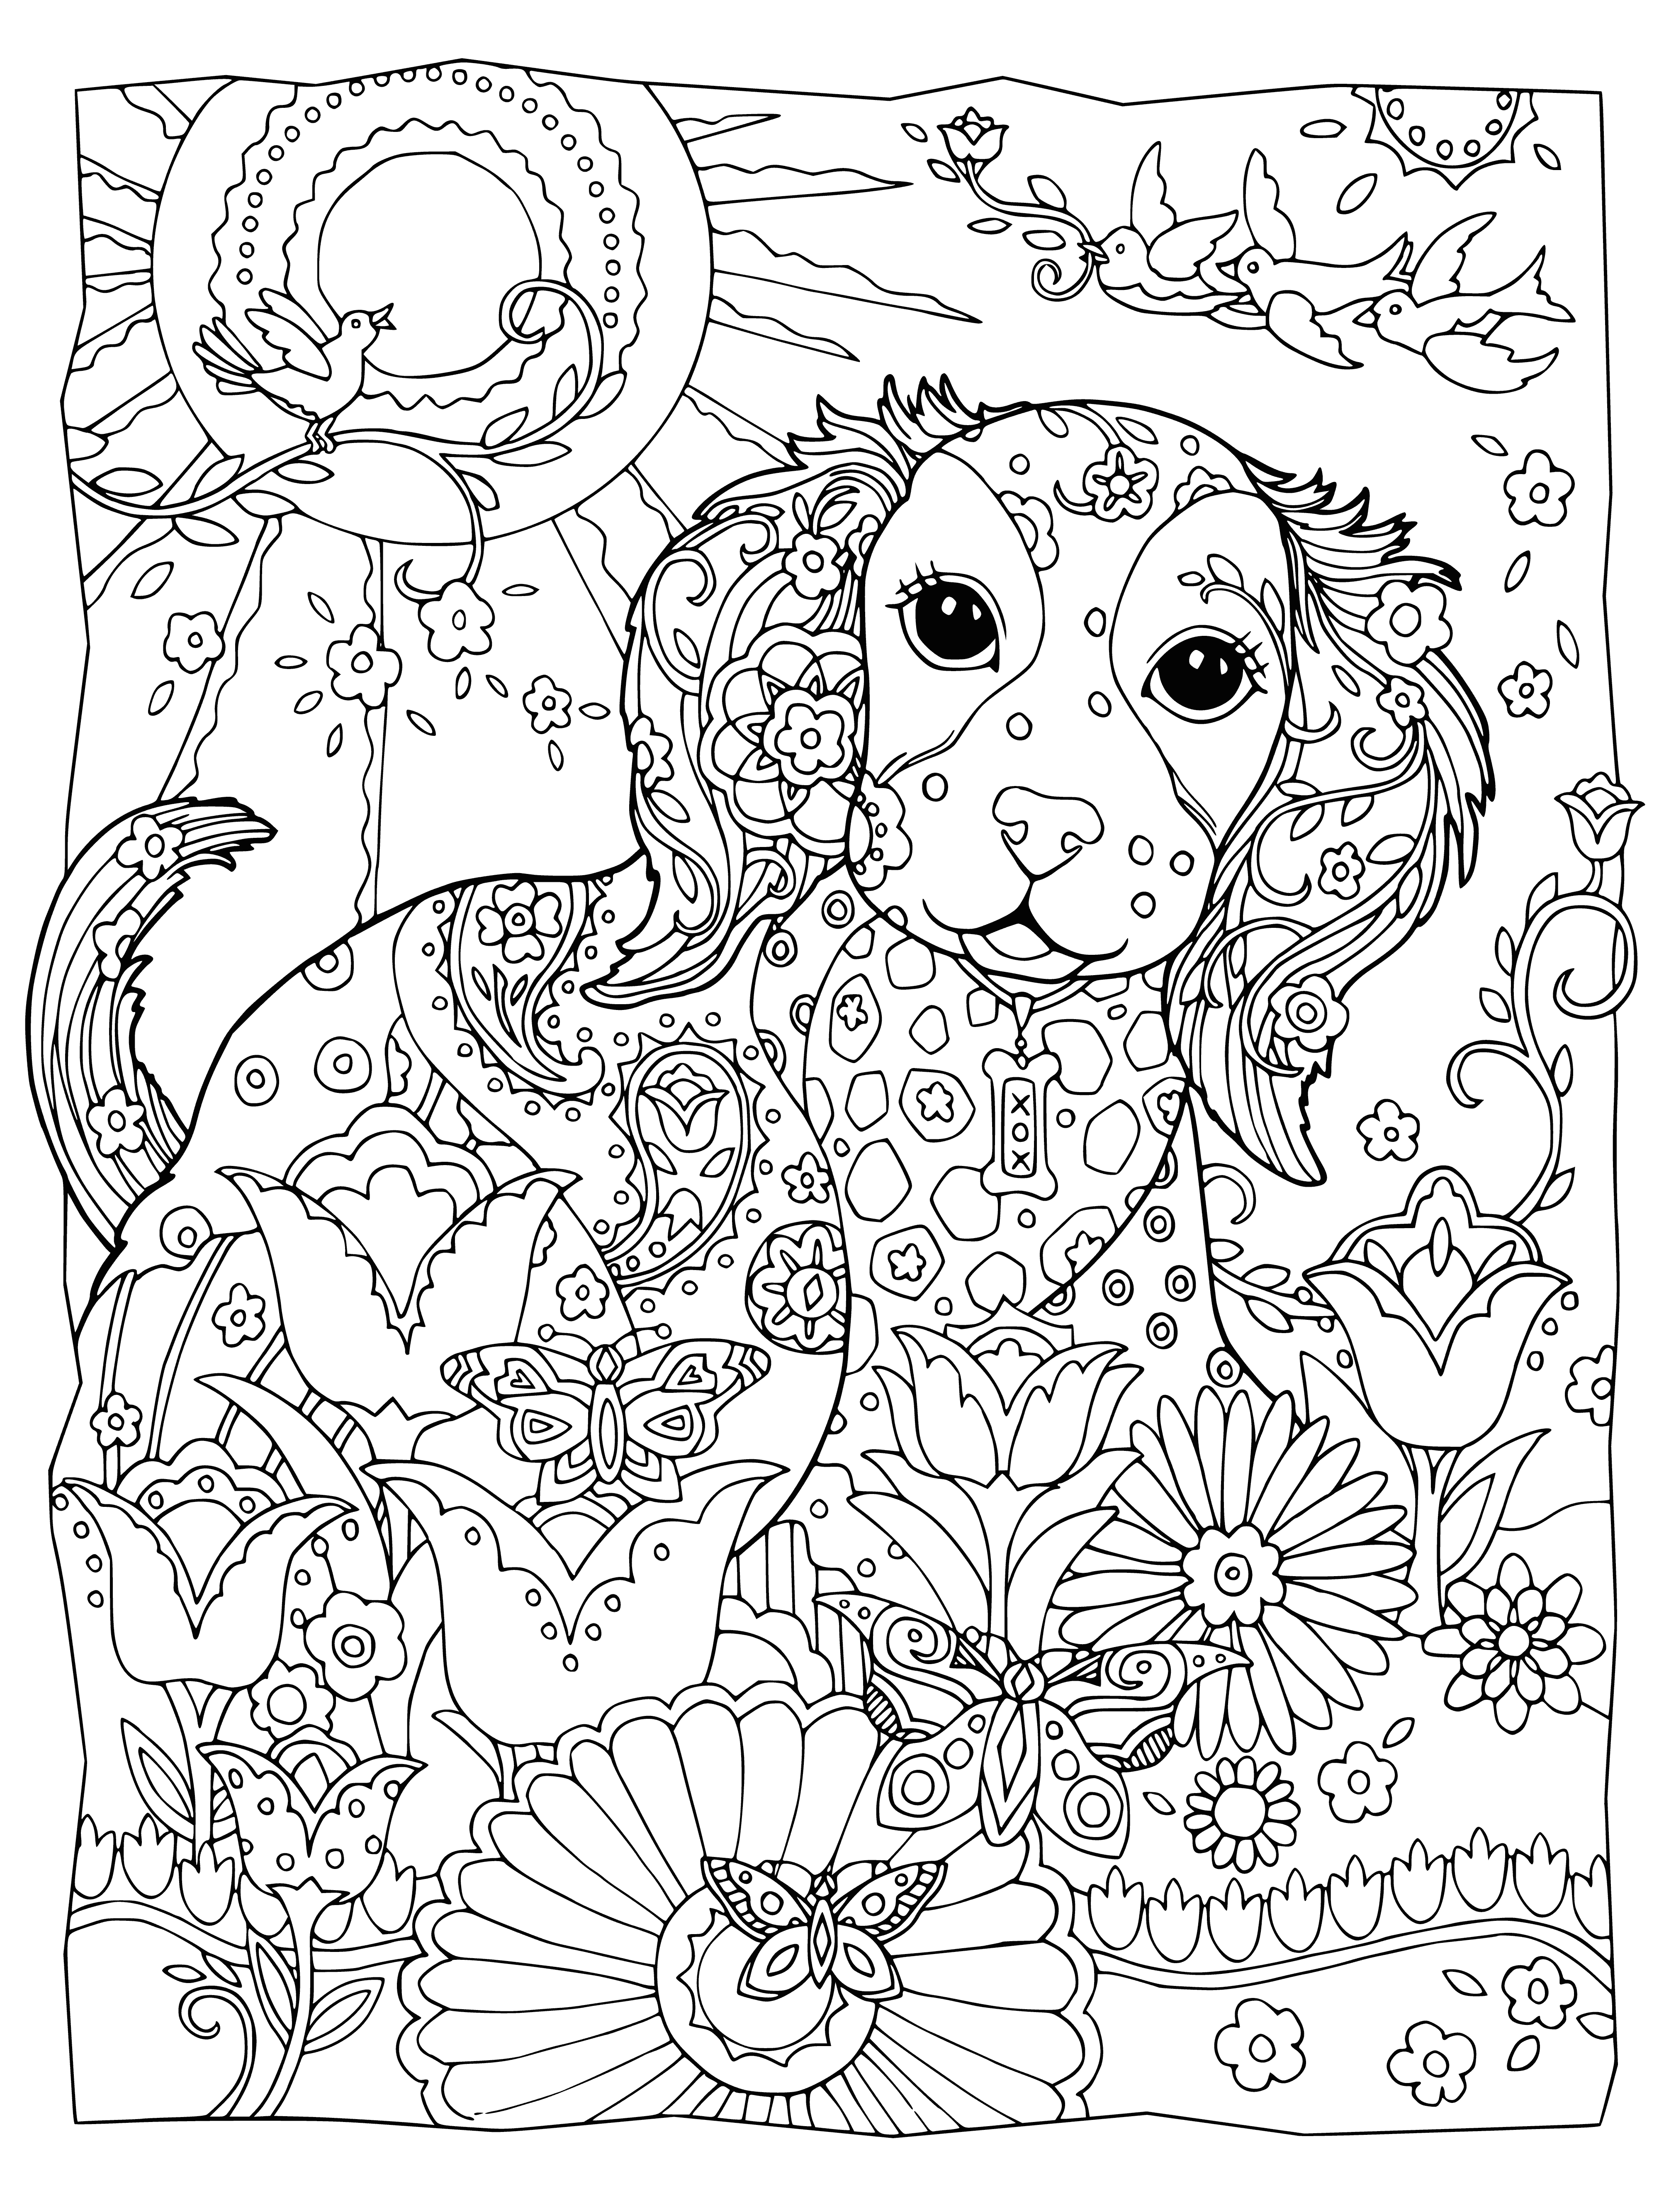 coloring page: 3 dogs in garden: a golden retriever, black lab, & brown & white dog, playing together.